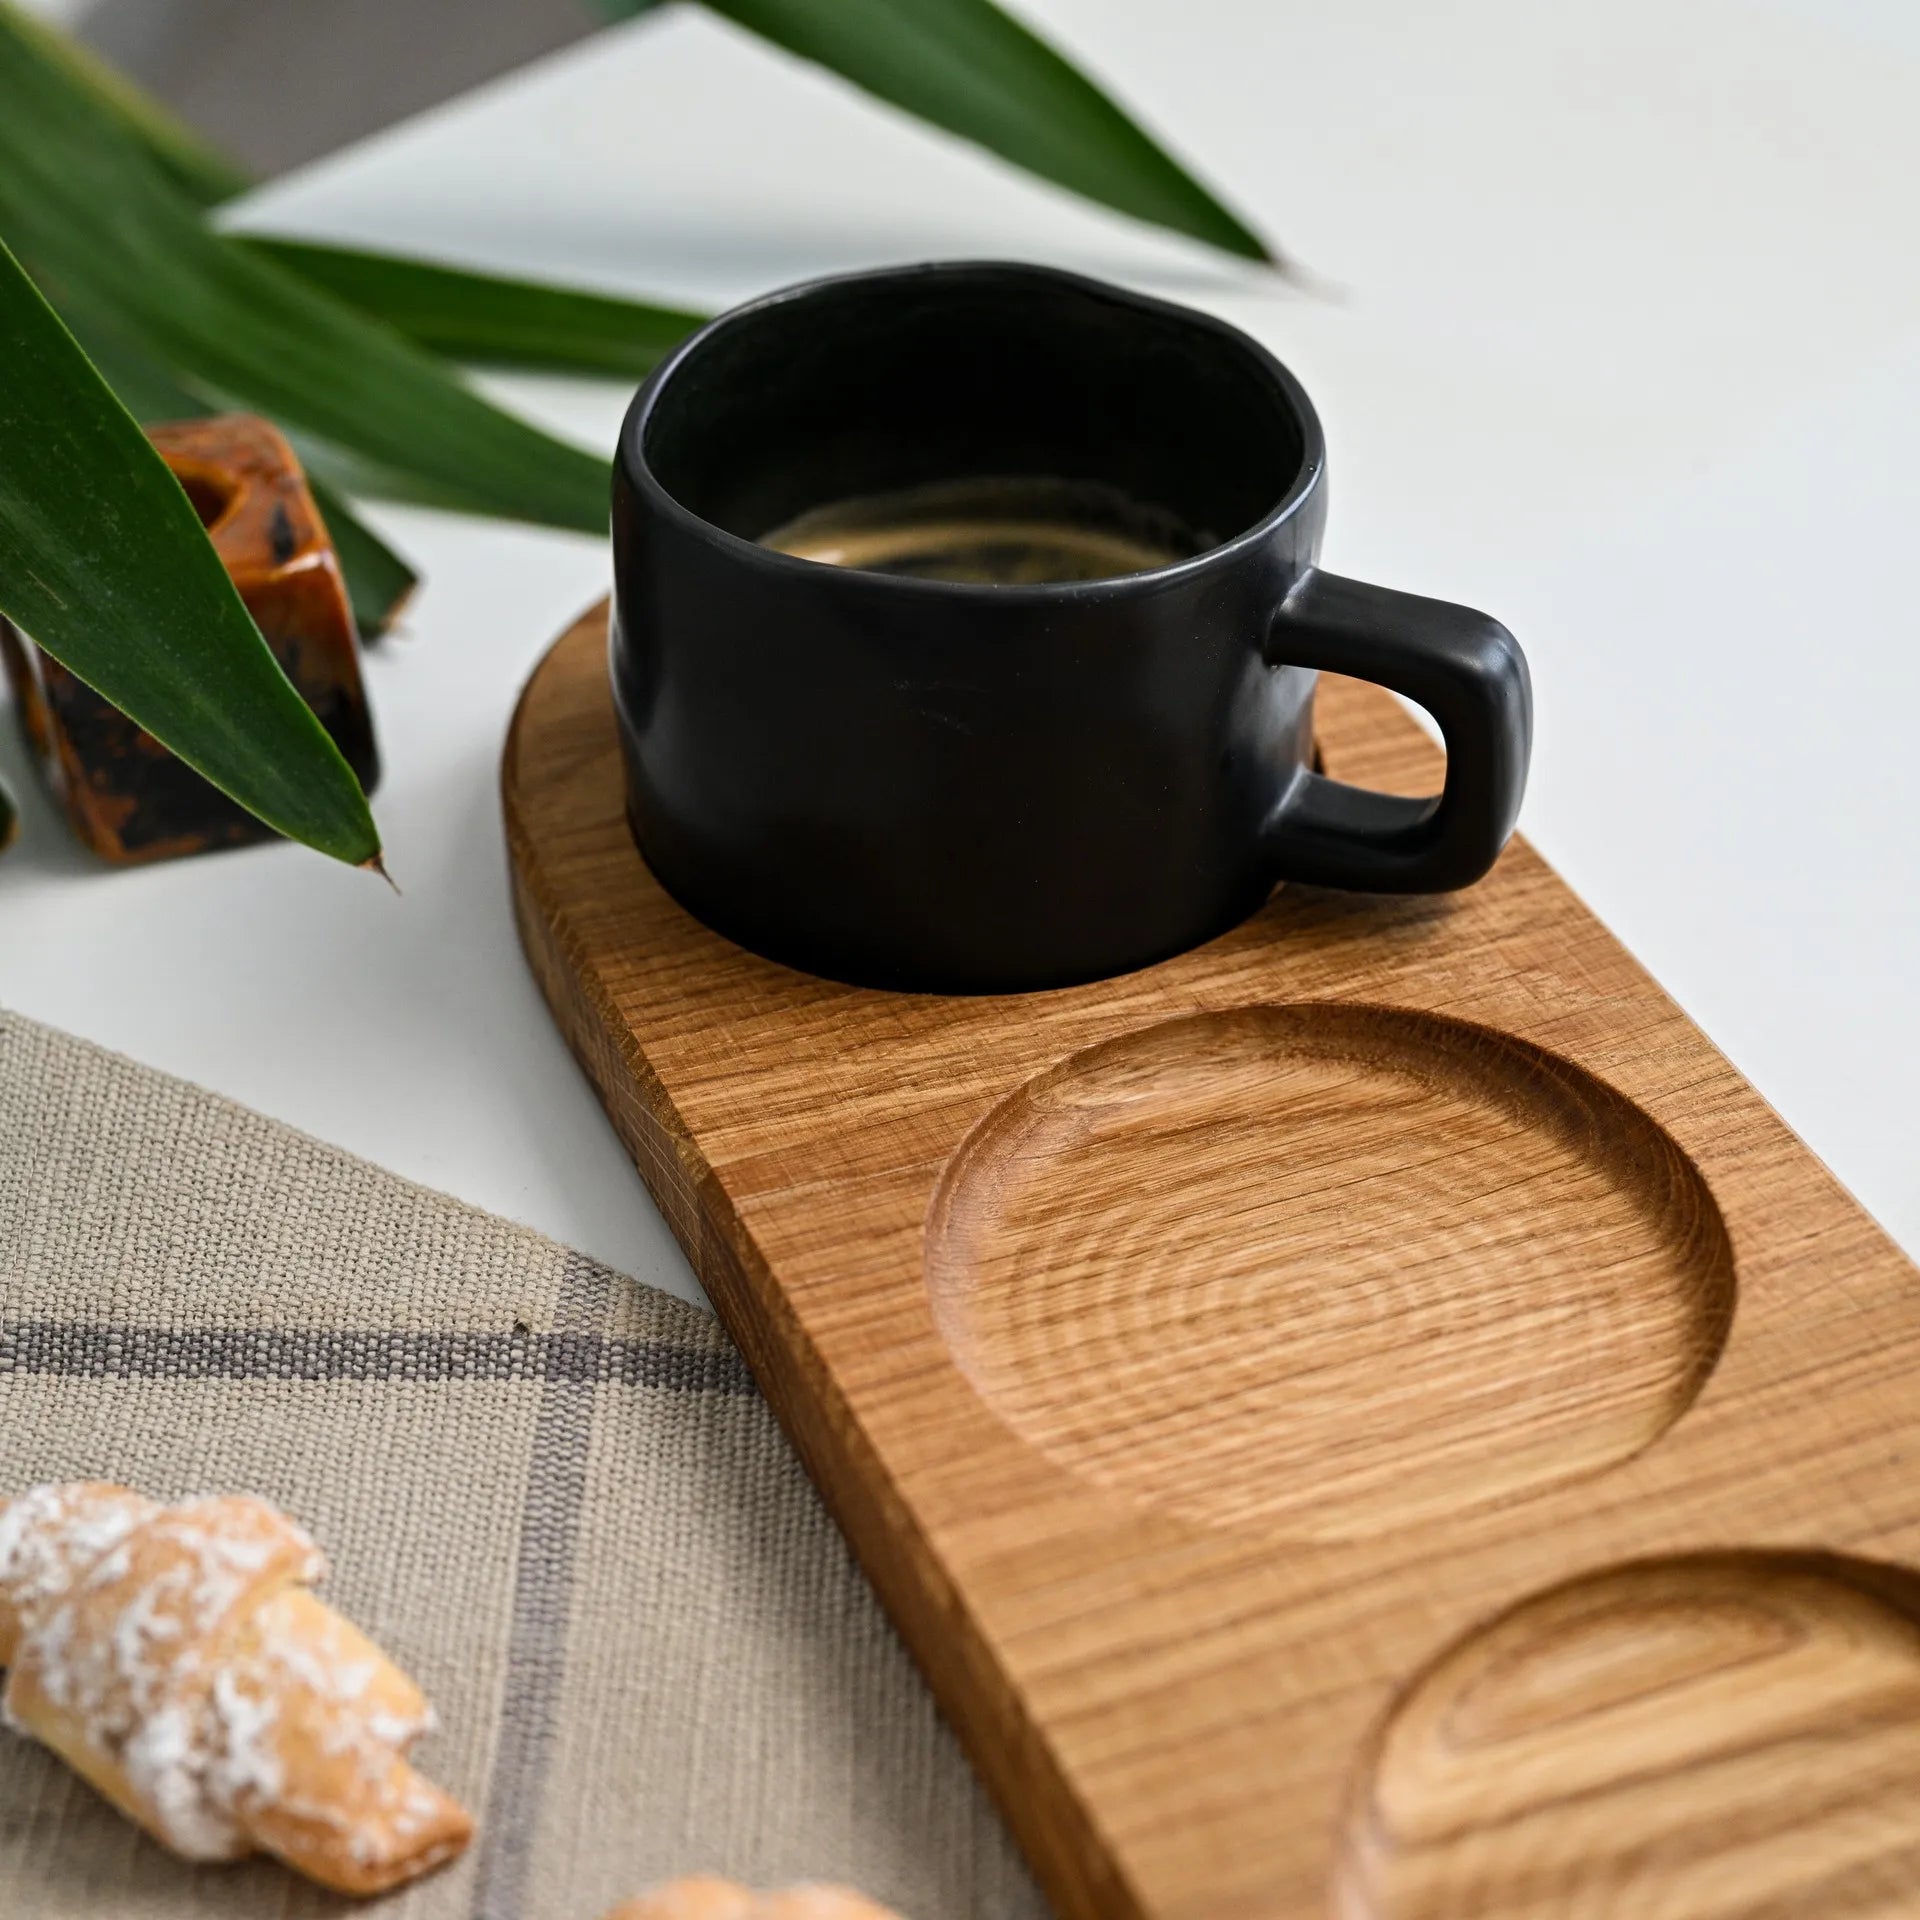 Customized serving tray for cafes and restaurants, featuring a rustic wood design for a chic and functional serving solution.